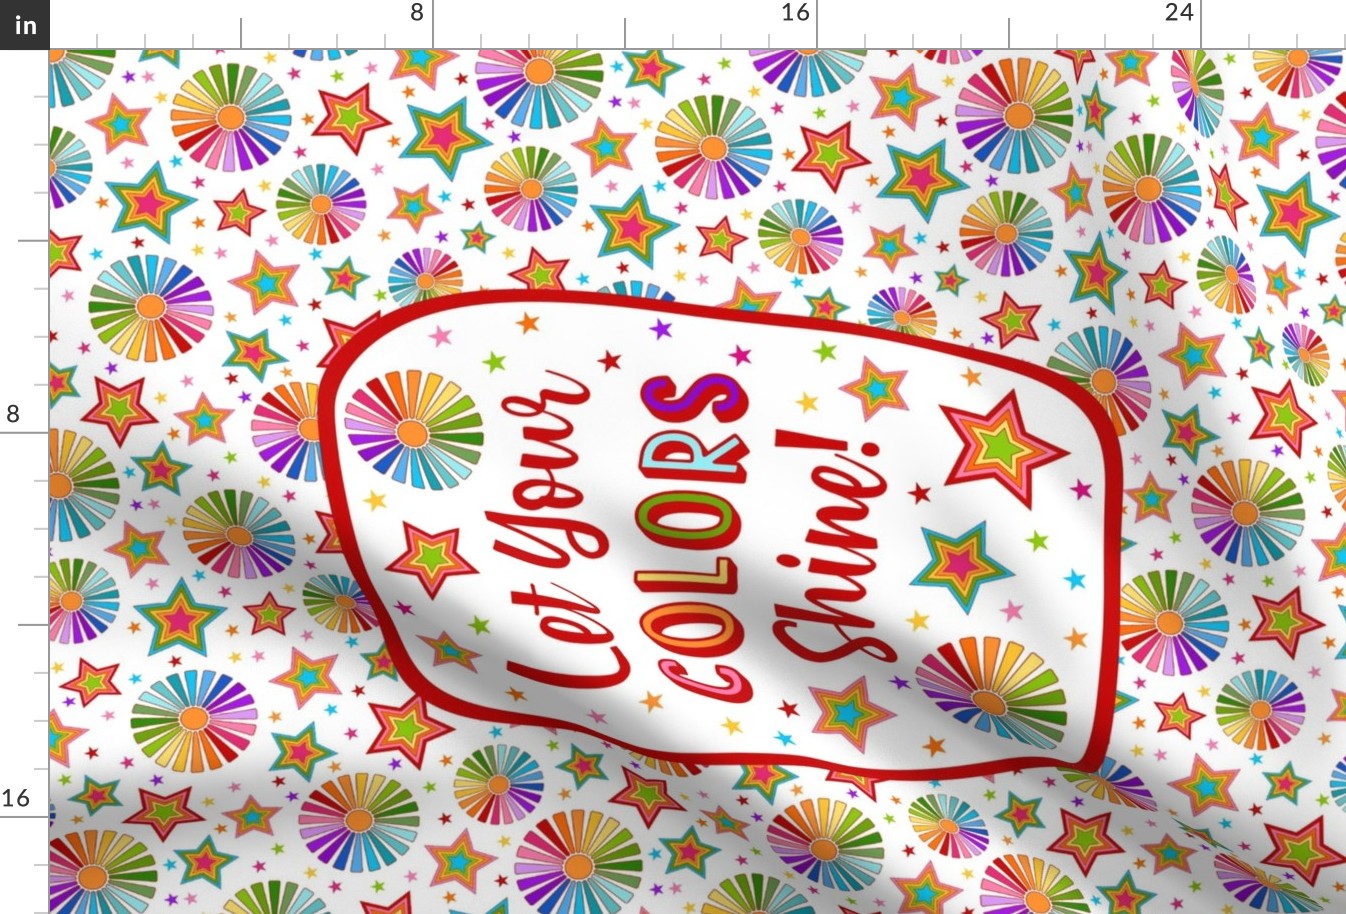 Large 27x18 Panel Let Your Colors Shine Rainbow Stars and Sunshine for Wall Hanging or Tea Towel